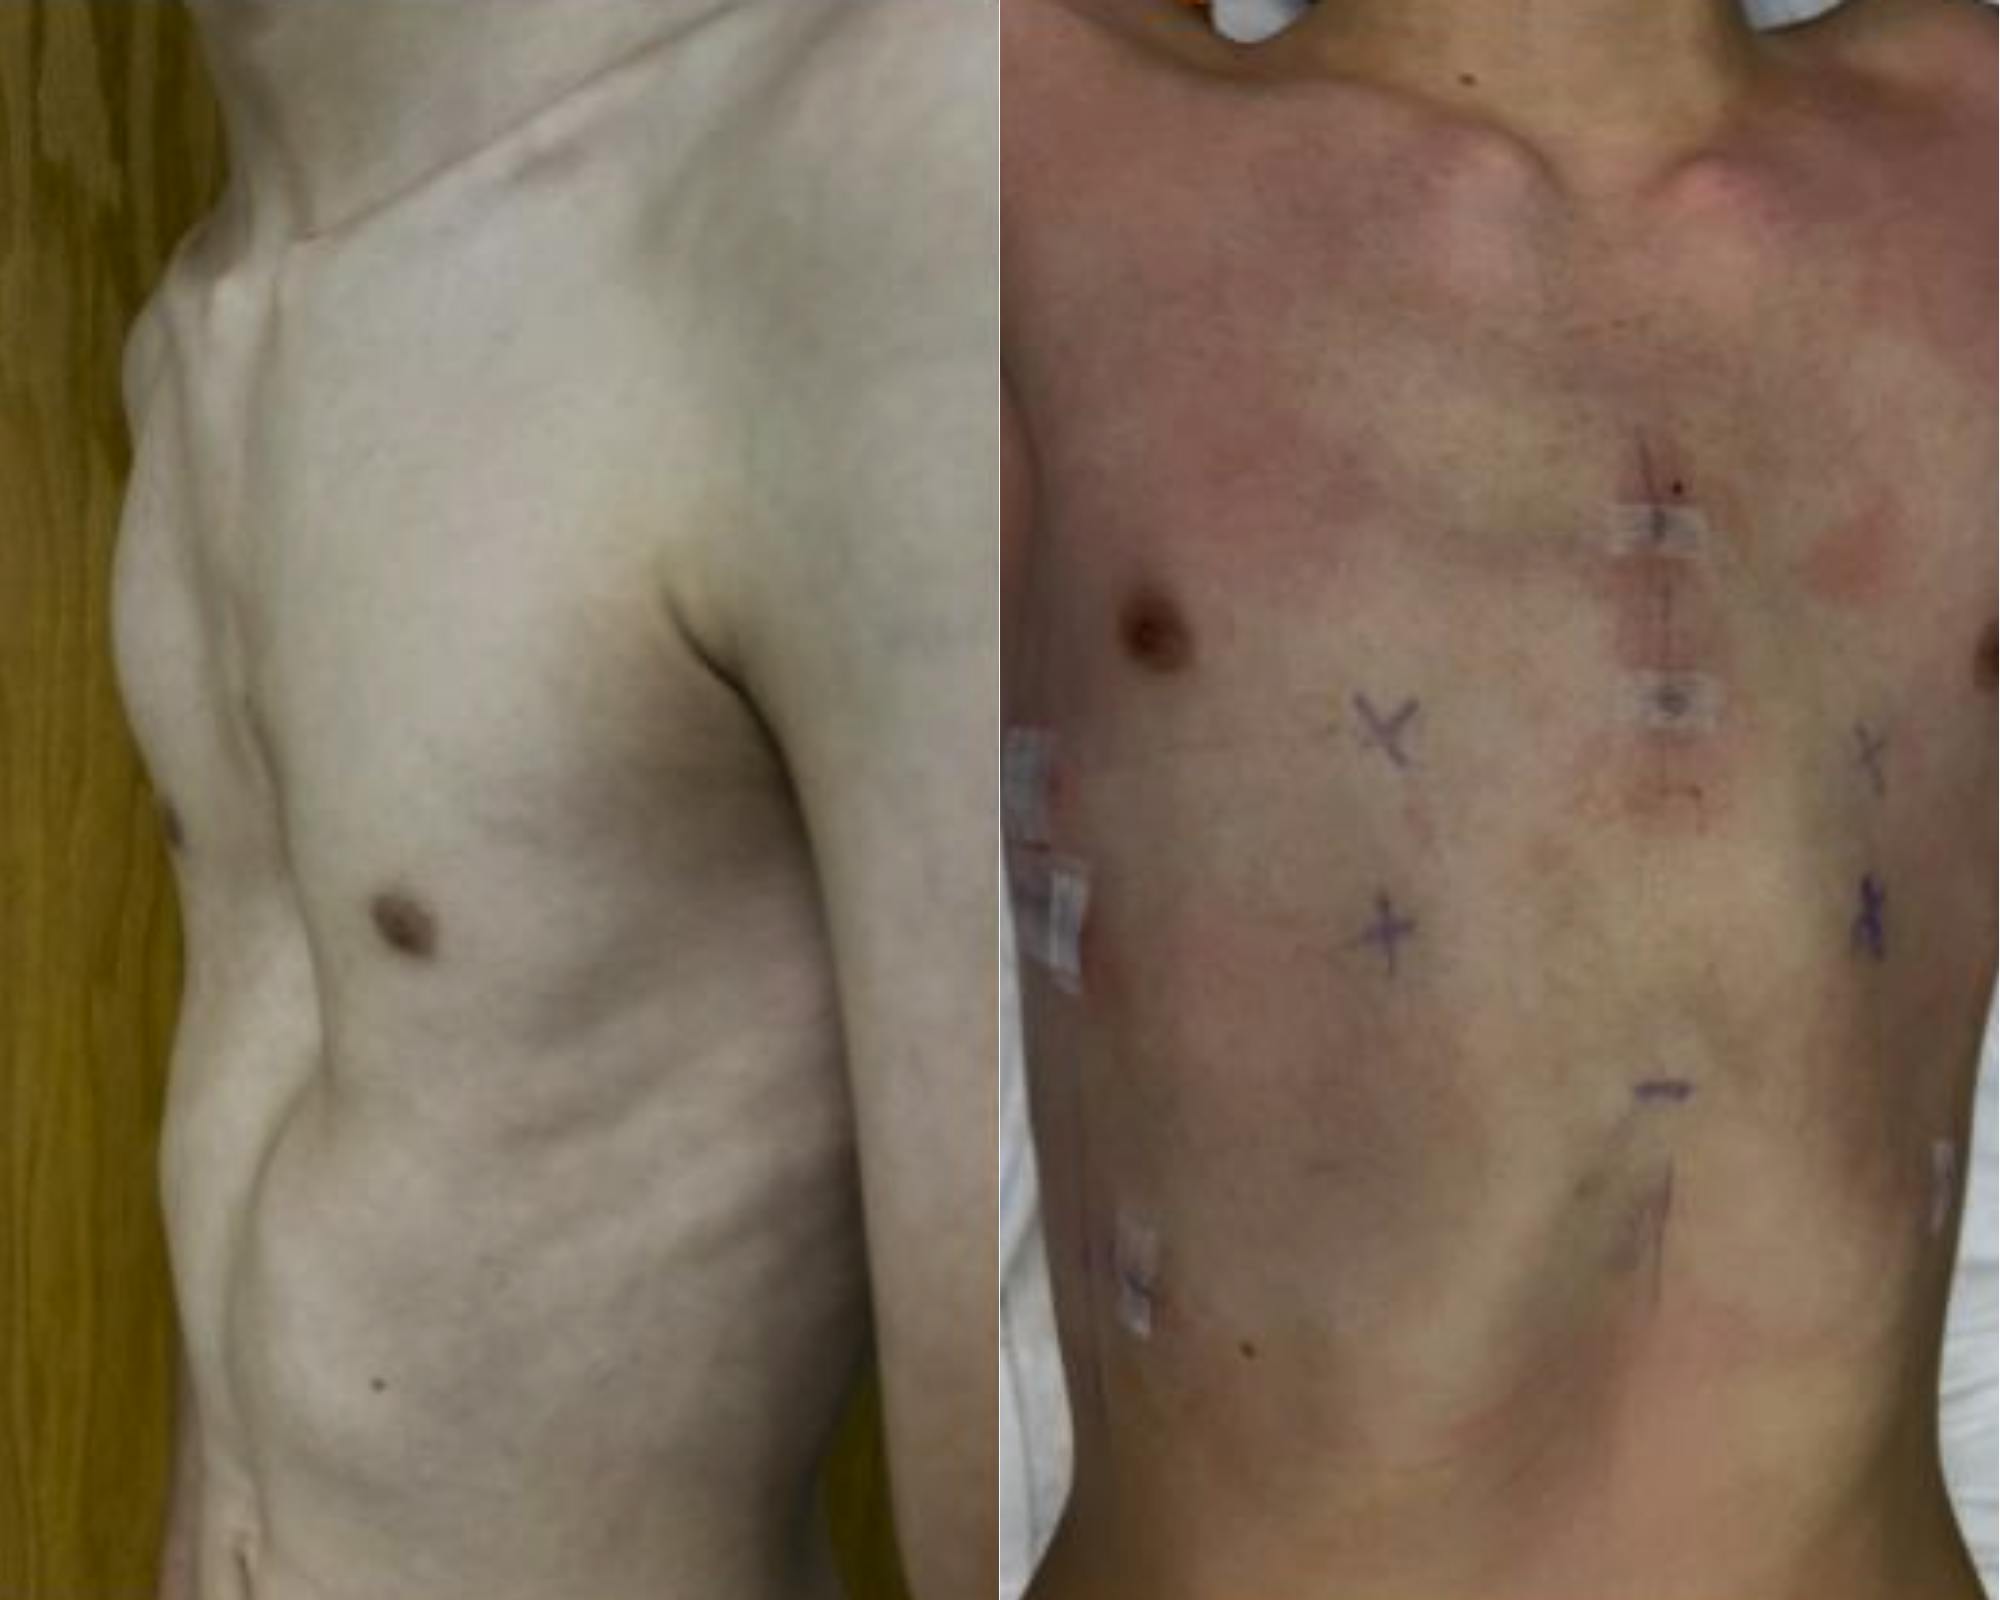 Chest Wall Surgery: A Physical and Mental Quality of Life Treatment